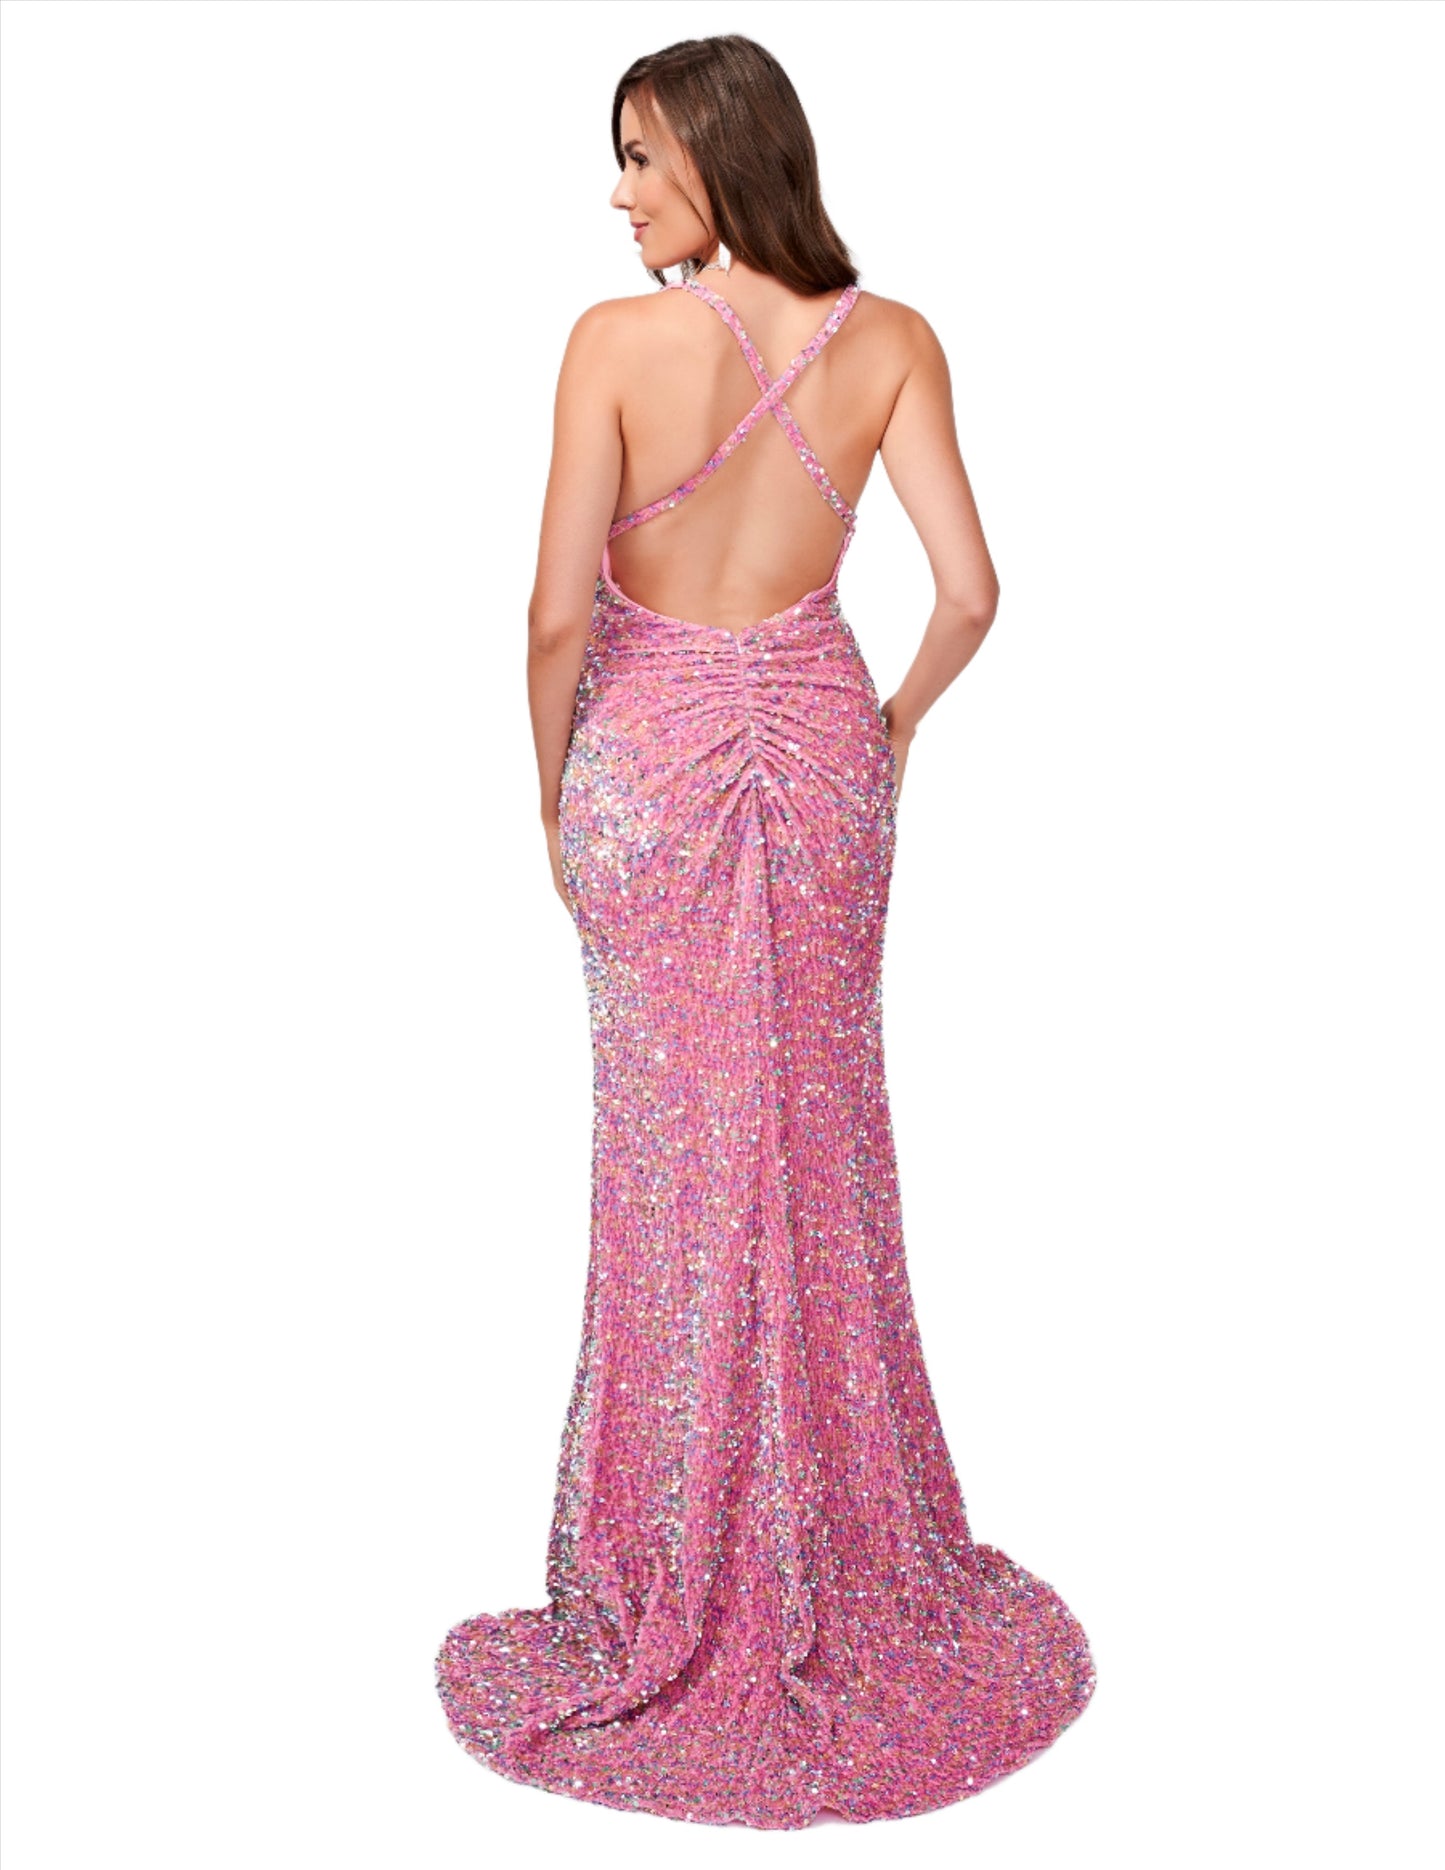 Turn heads in this stunning Nina Canacci 8233 Sequin Velvet Prom Dress. The dress features a sequin velvet bodice, ruched detailing, and a flattering maxi silhouette with a thigh-high slit. Perfect for formal evening events, this dress will make you feel confident and glamorous. Backless